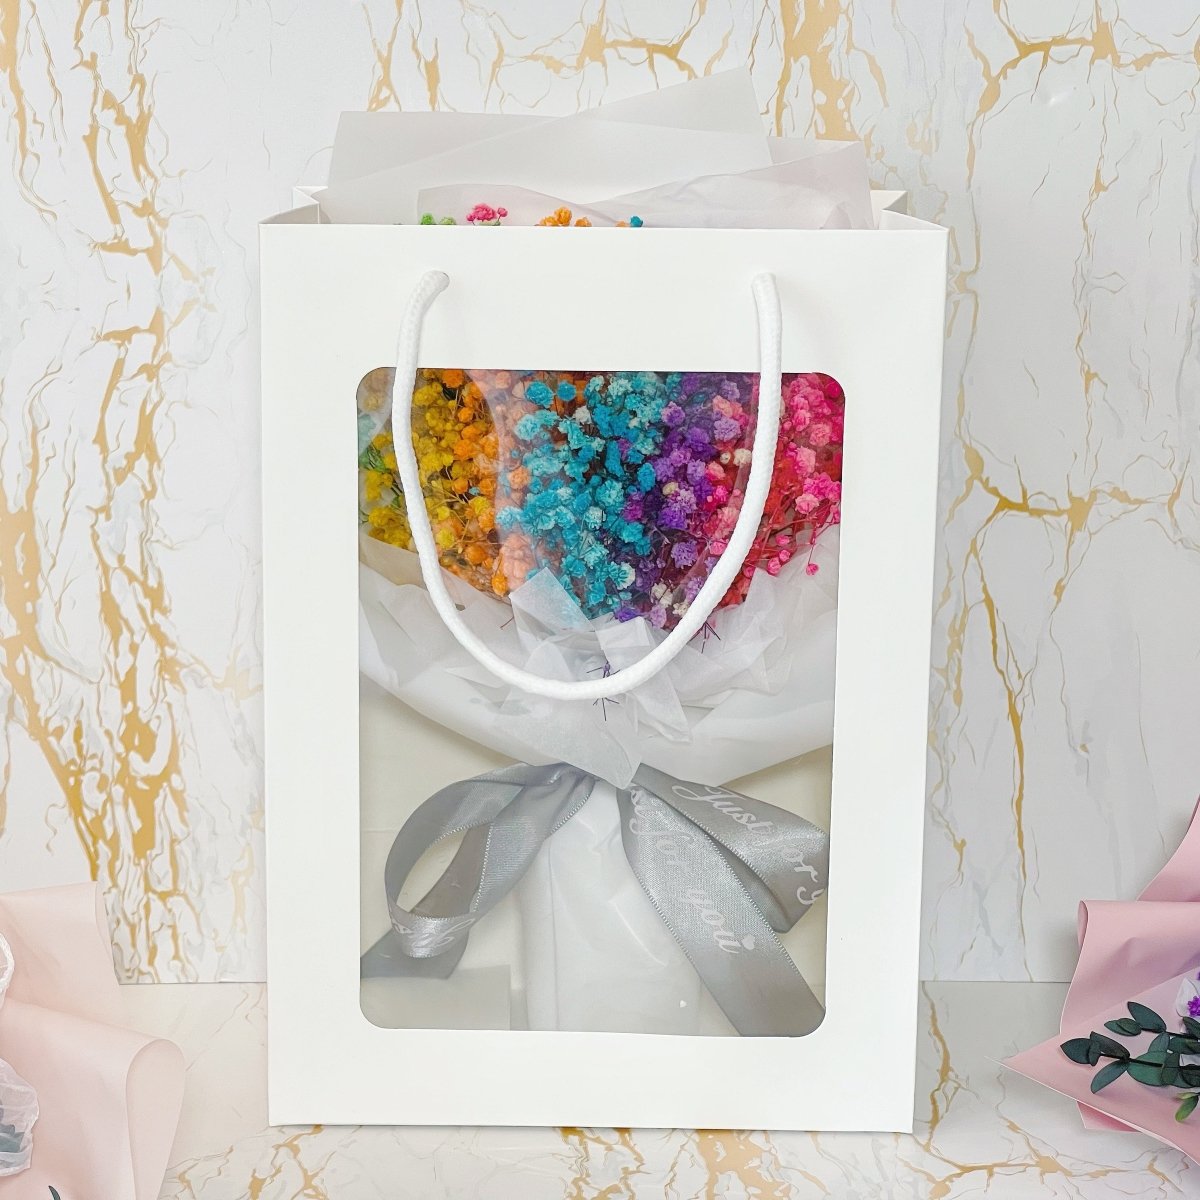 Rainbow Baby Breath - Everlasting Flower Bouquet (Real Preserved Roses and Dried Flowers) - Rainbowly Fresh Fruit Gift and Flower Arrangments